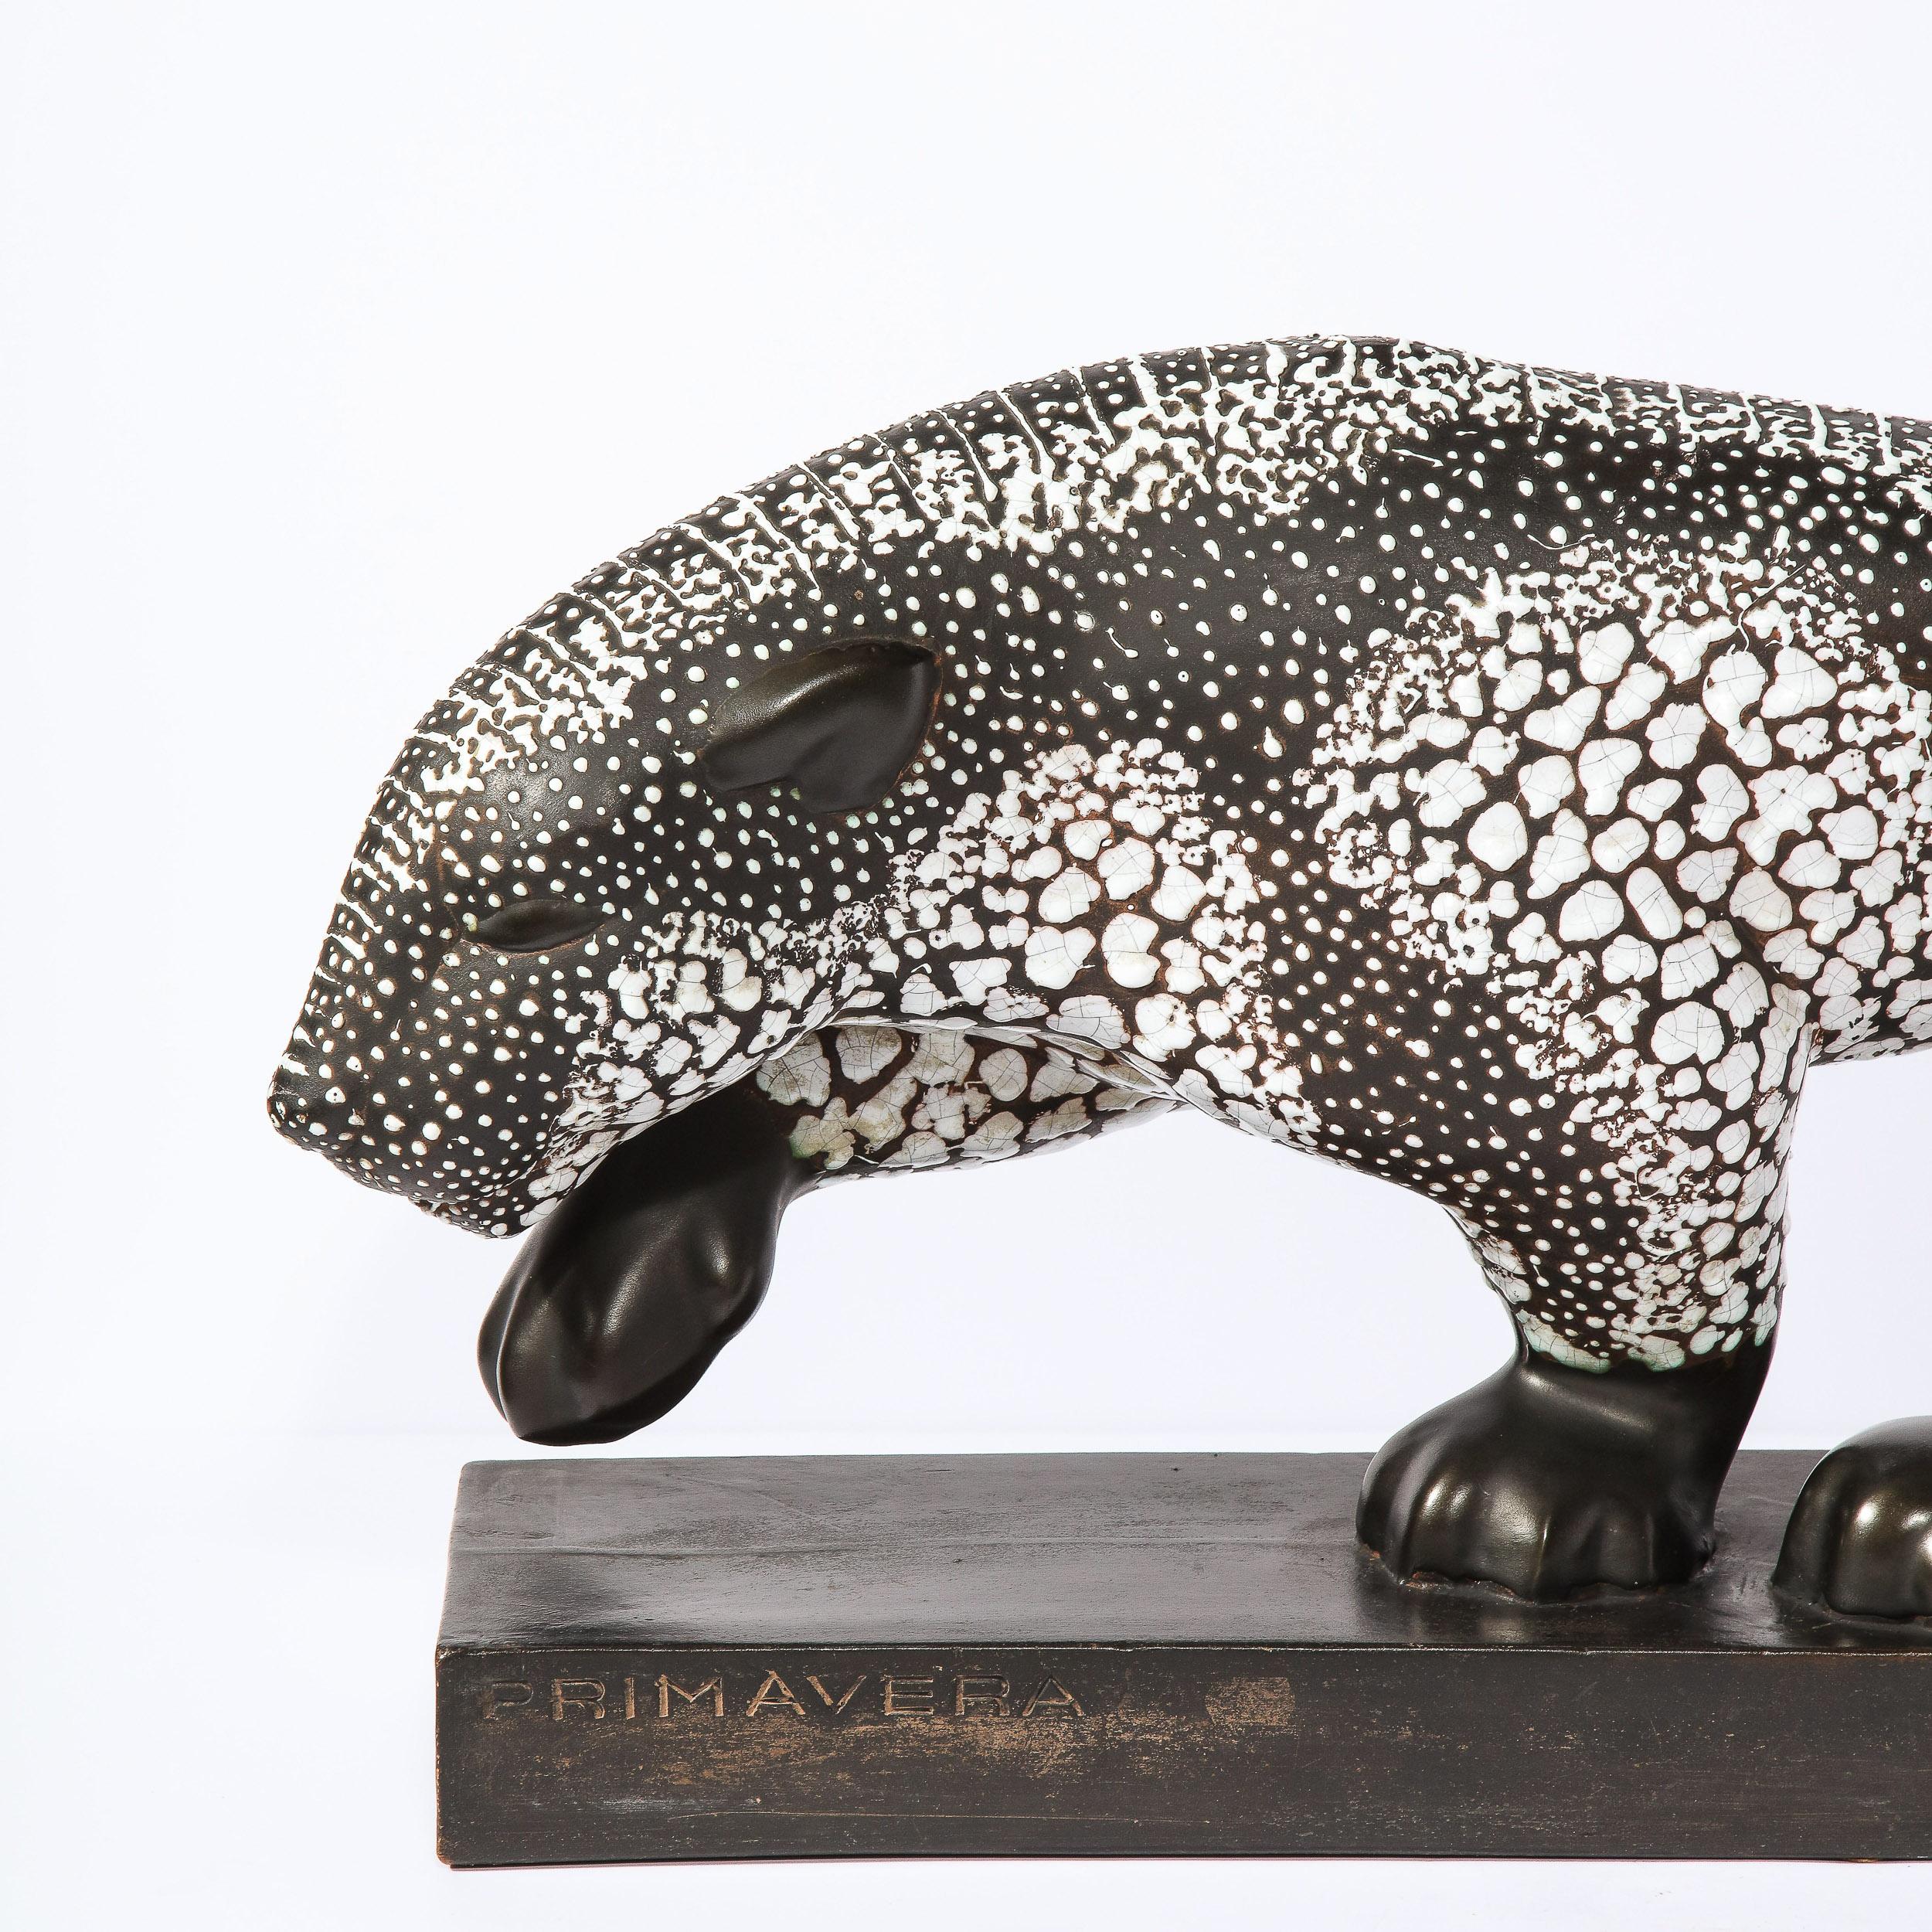 French Art Deco Glazed Ceramic Panther Sculpture Signed E. Pierre for Atelier Primavera